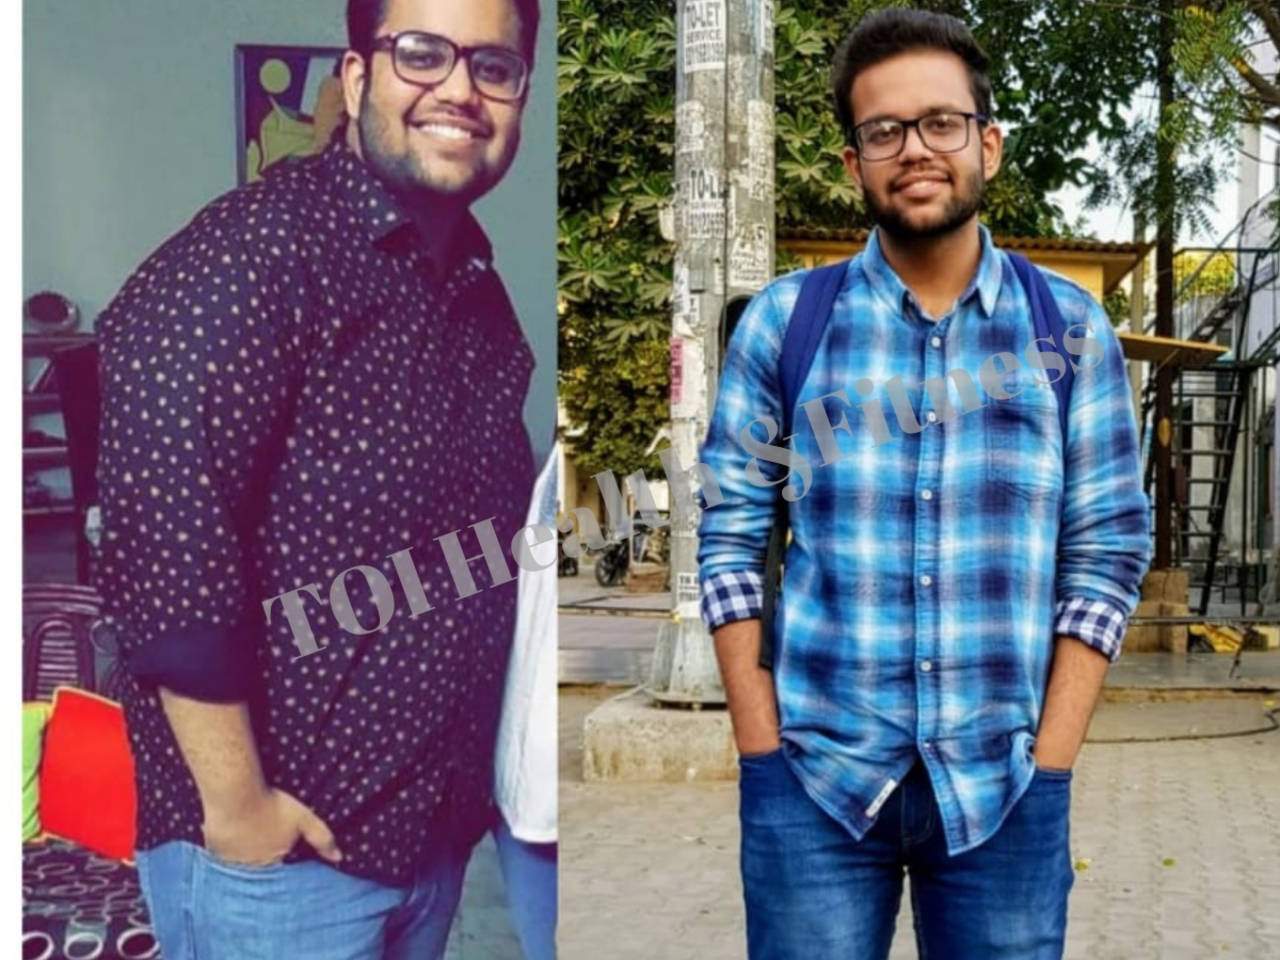 Weight loss: From 125 to 80 kilos, this student lost a massive 45 kilos -  Times of India